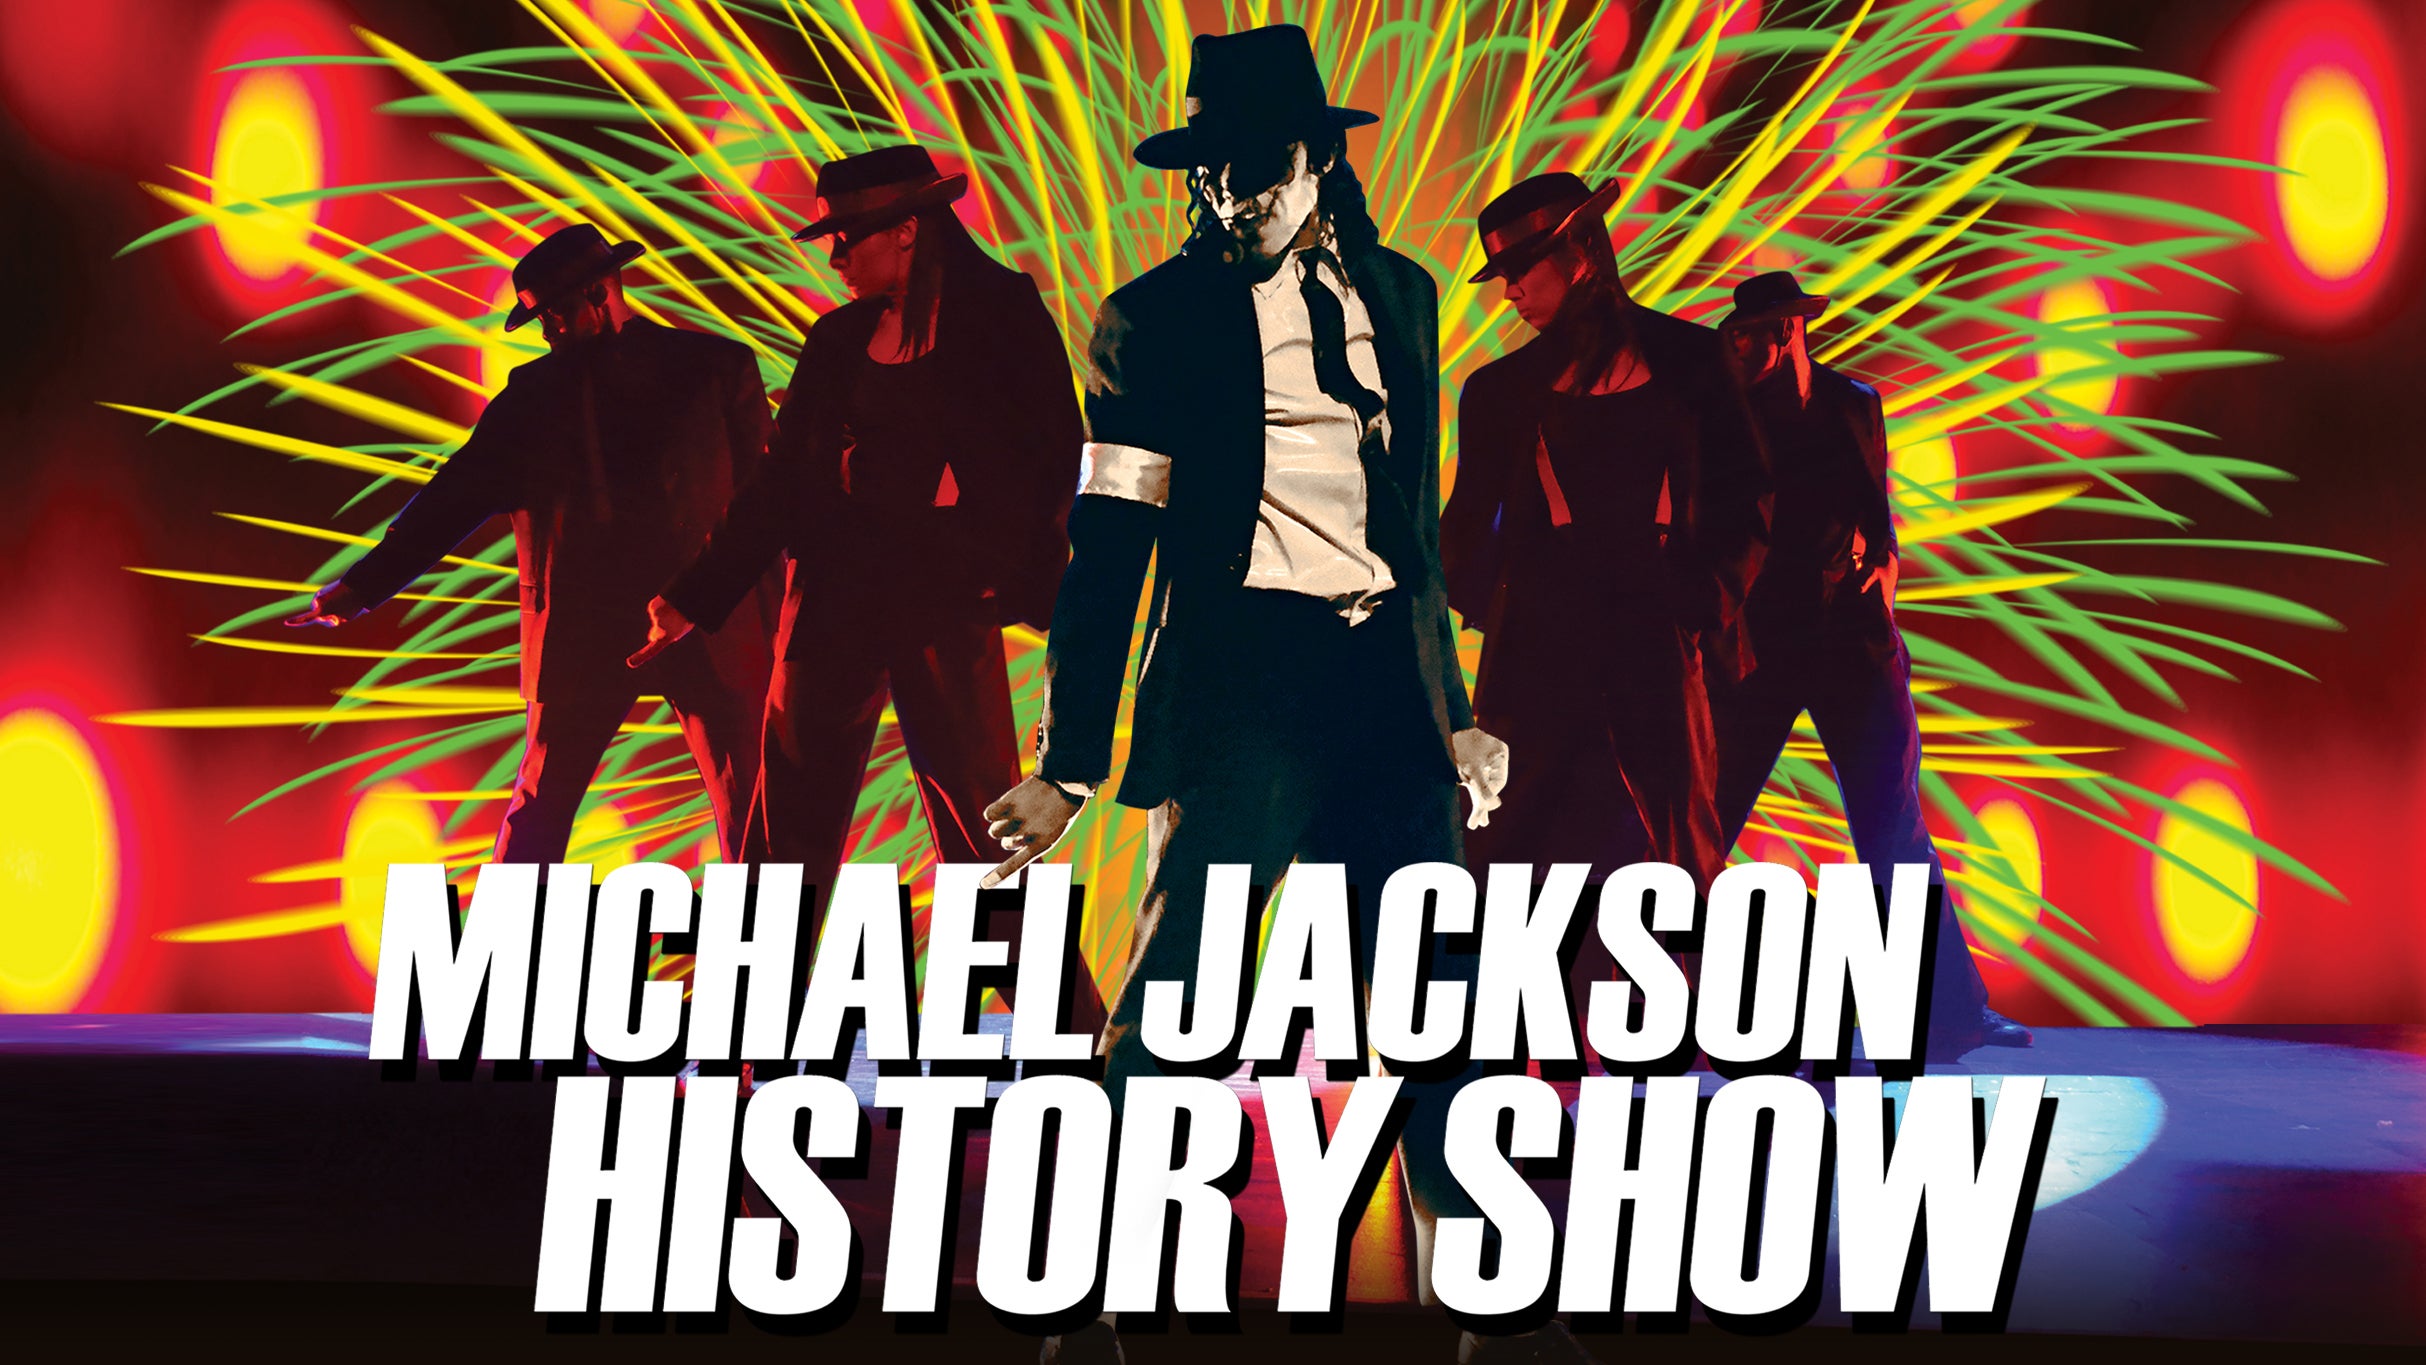 The Michael Jackson HIStory Show in Thunder Bay promo photo for Child Admission presale offer code